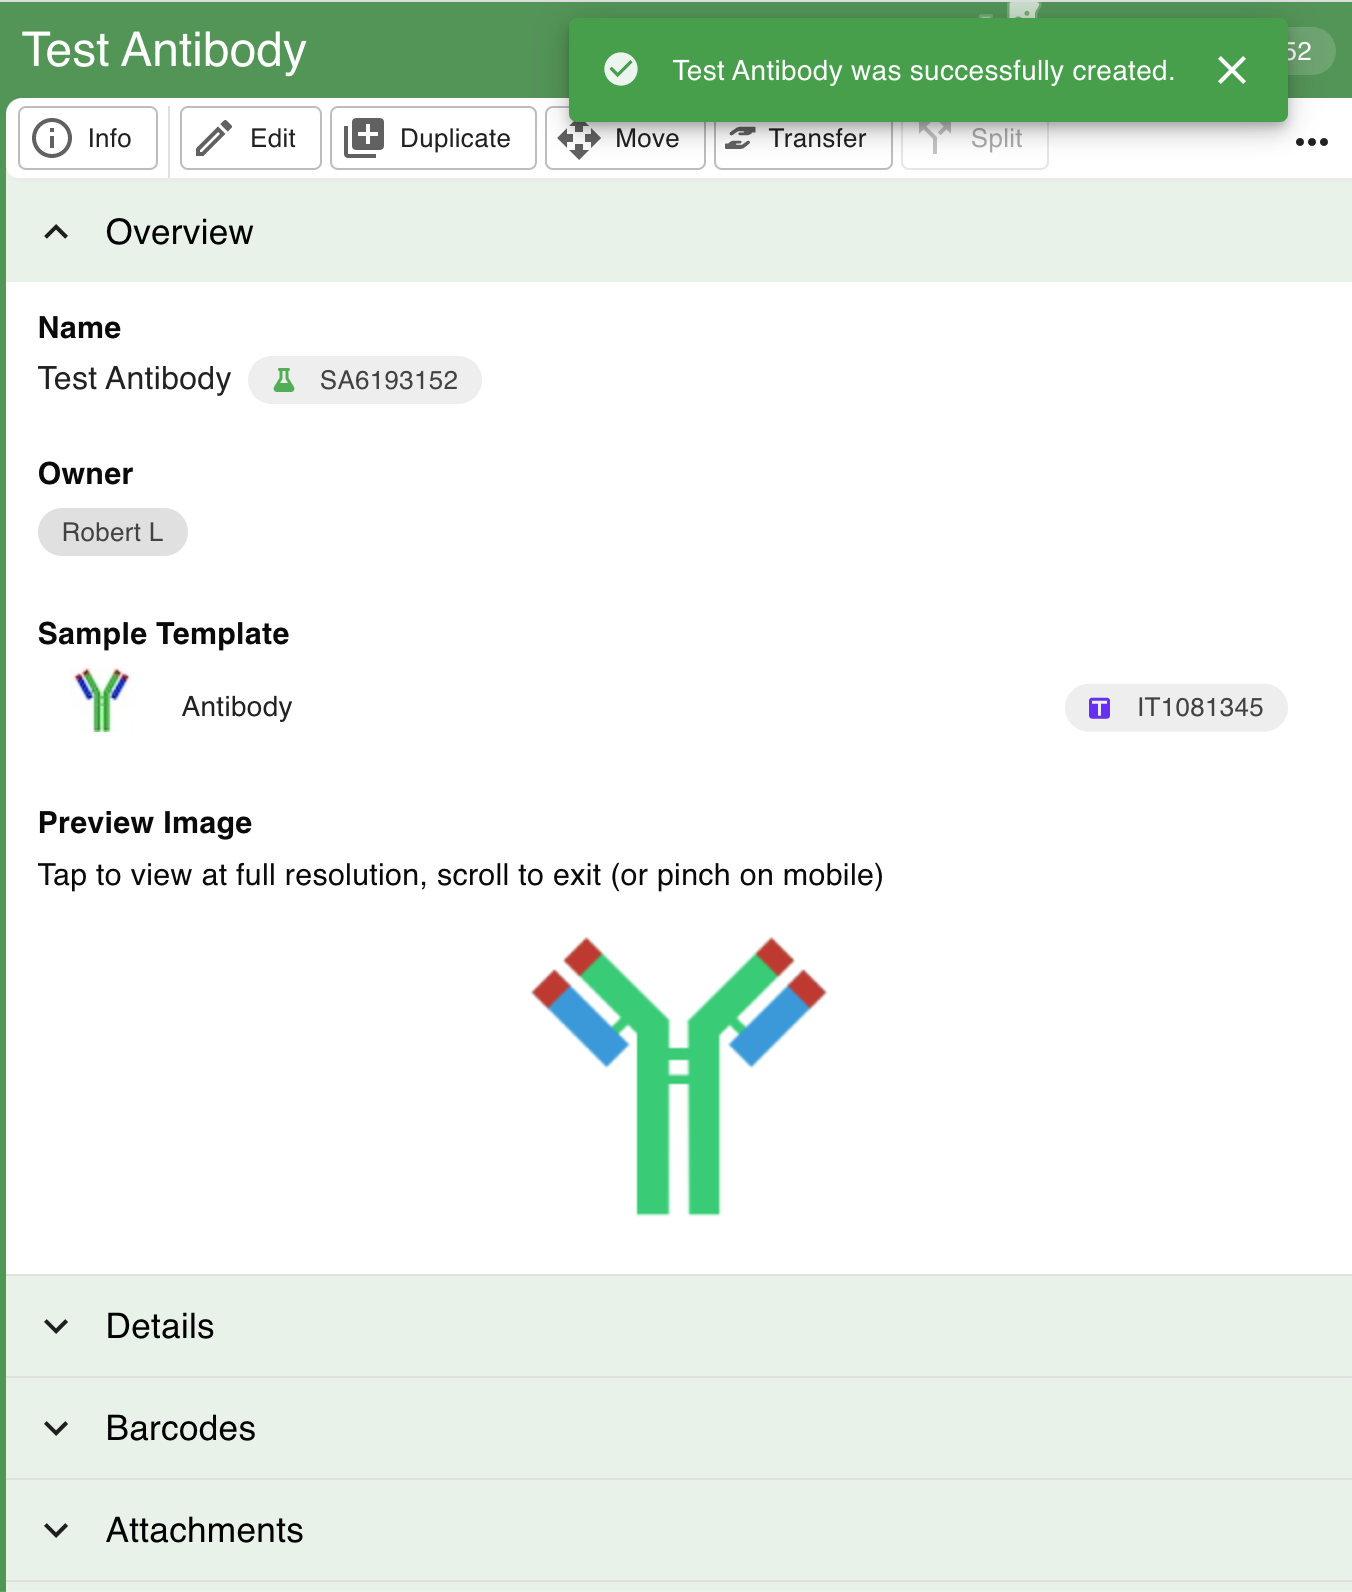 Screenshot of preview of newly created sample with green alert in top right corner reading "Test Antibody was successfully created."